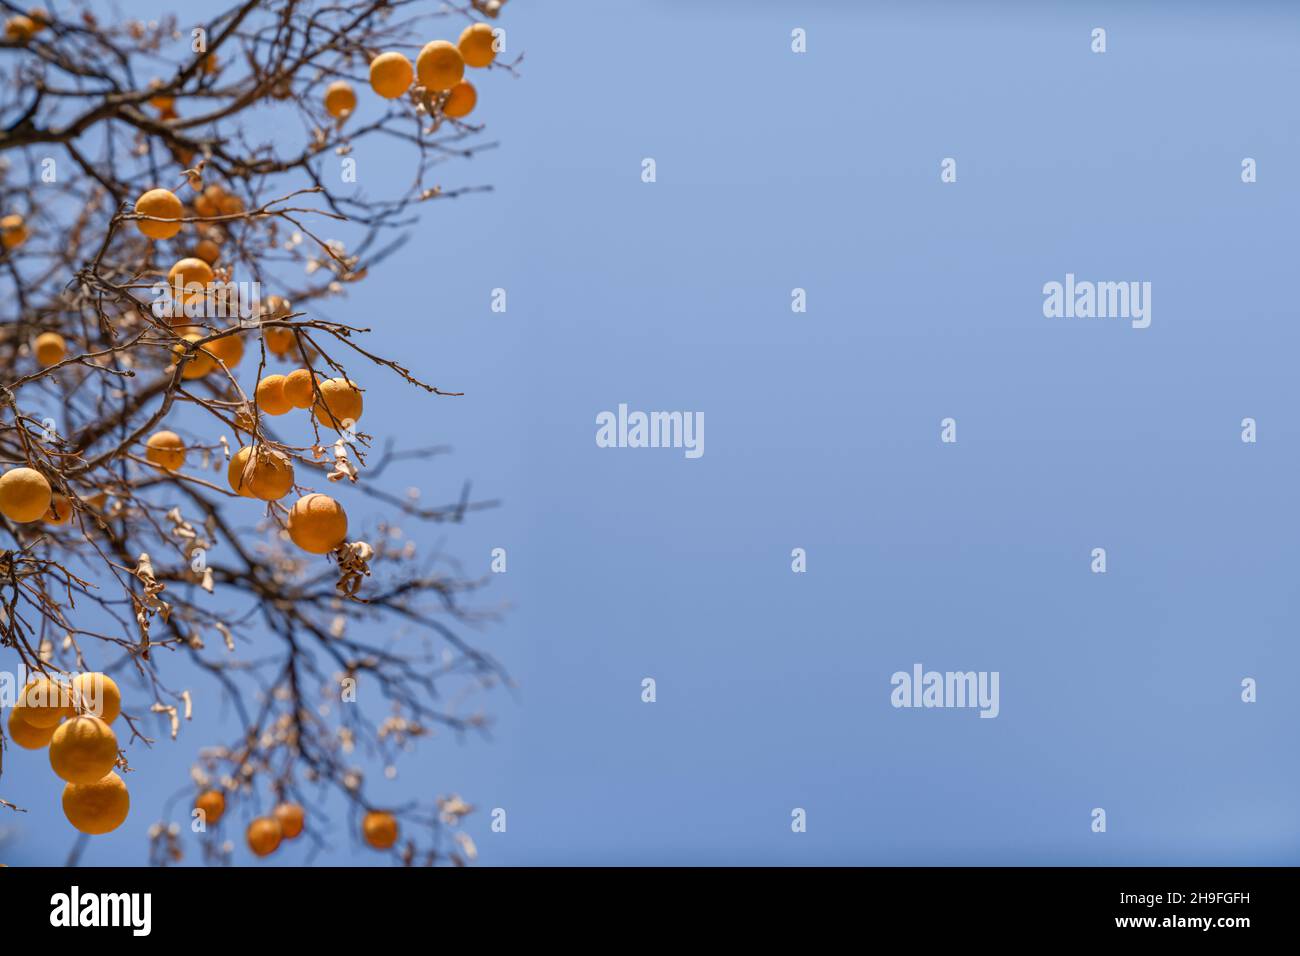 Concept of autumn, health and ecology. Oranges hang on dry branches without leaves against a blue sky. Copy space Stock Photo